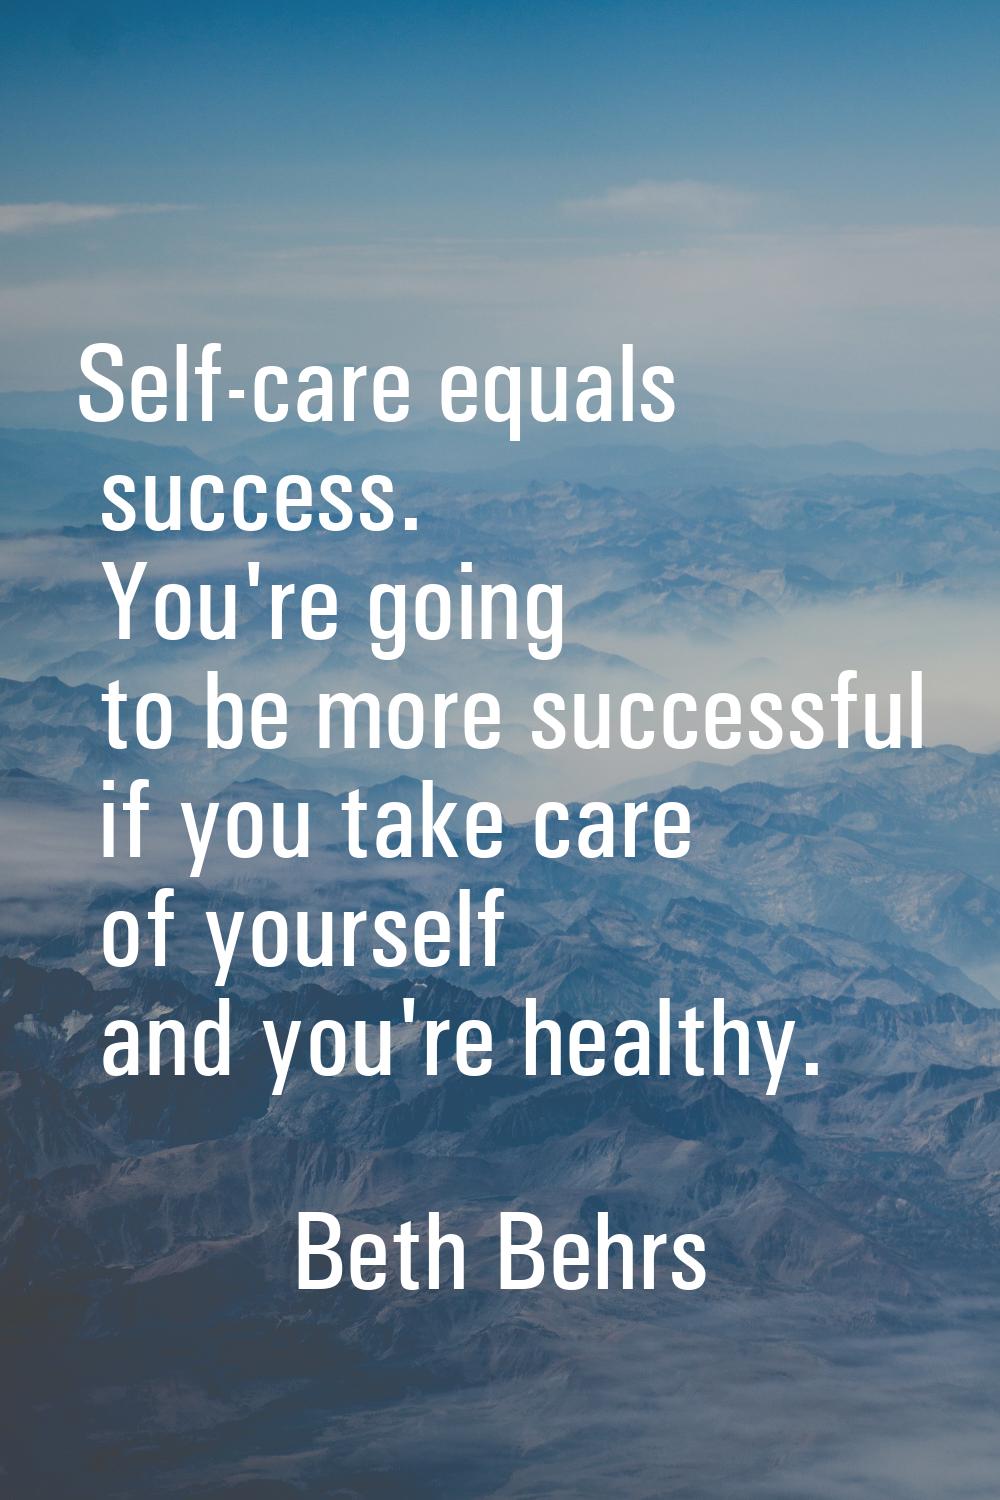 Self-care equals success. You're going to be more successful if you take care of yourself and you'r